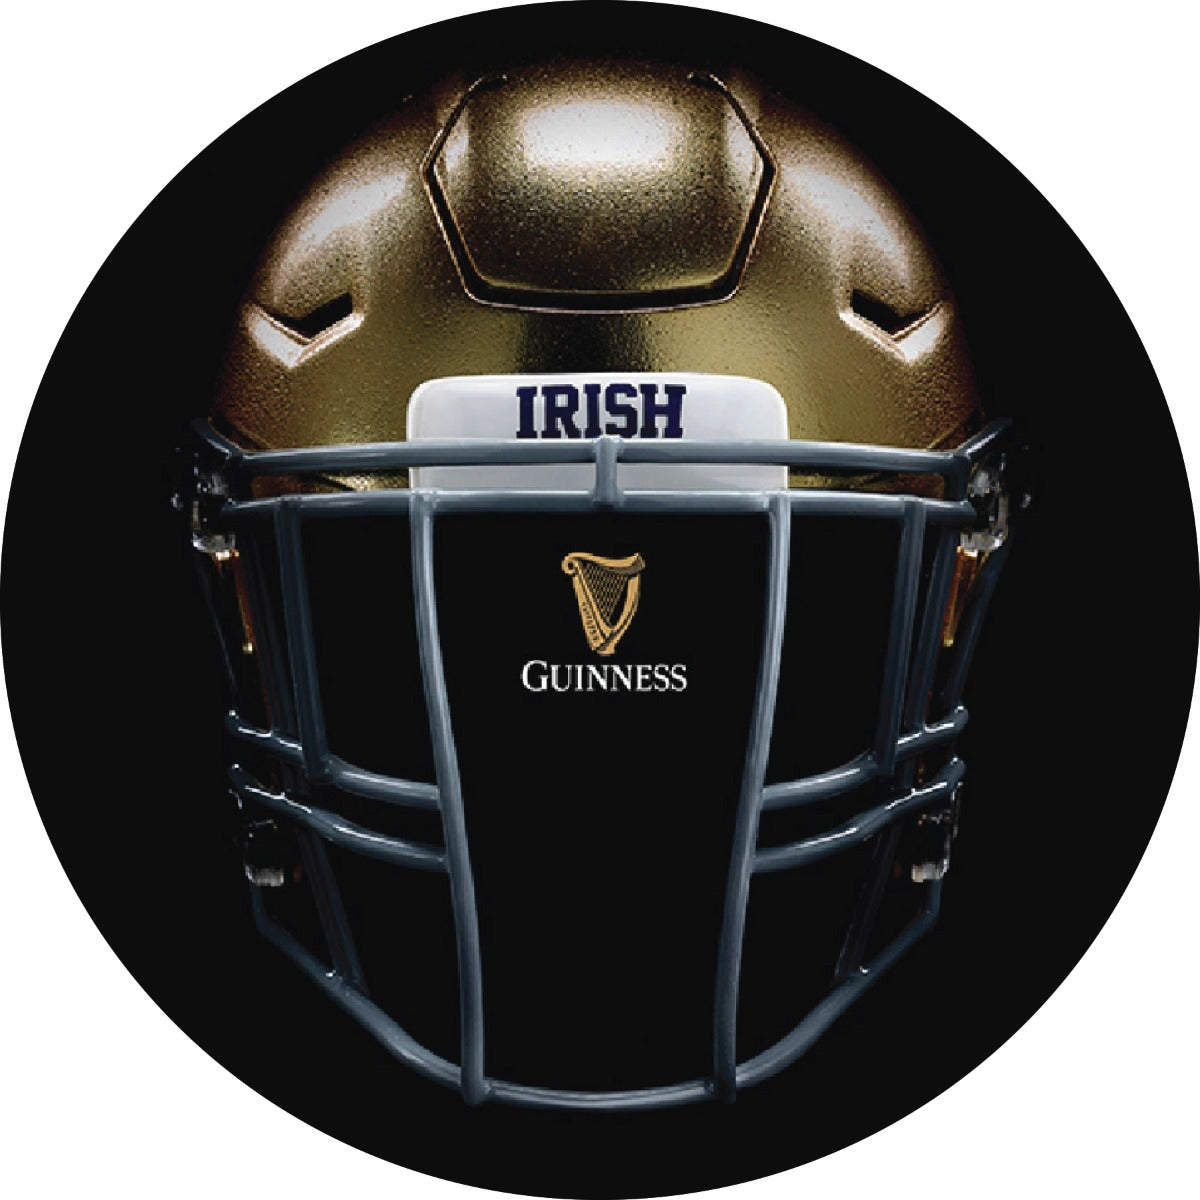 A Guinness Notre Dame Helmet Pub Table featuring the Notre Dame logo on a black background.